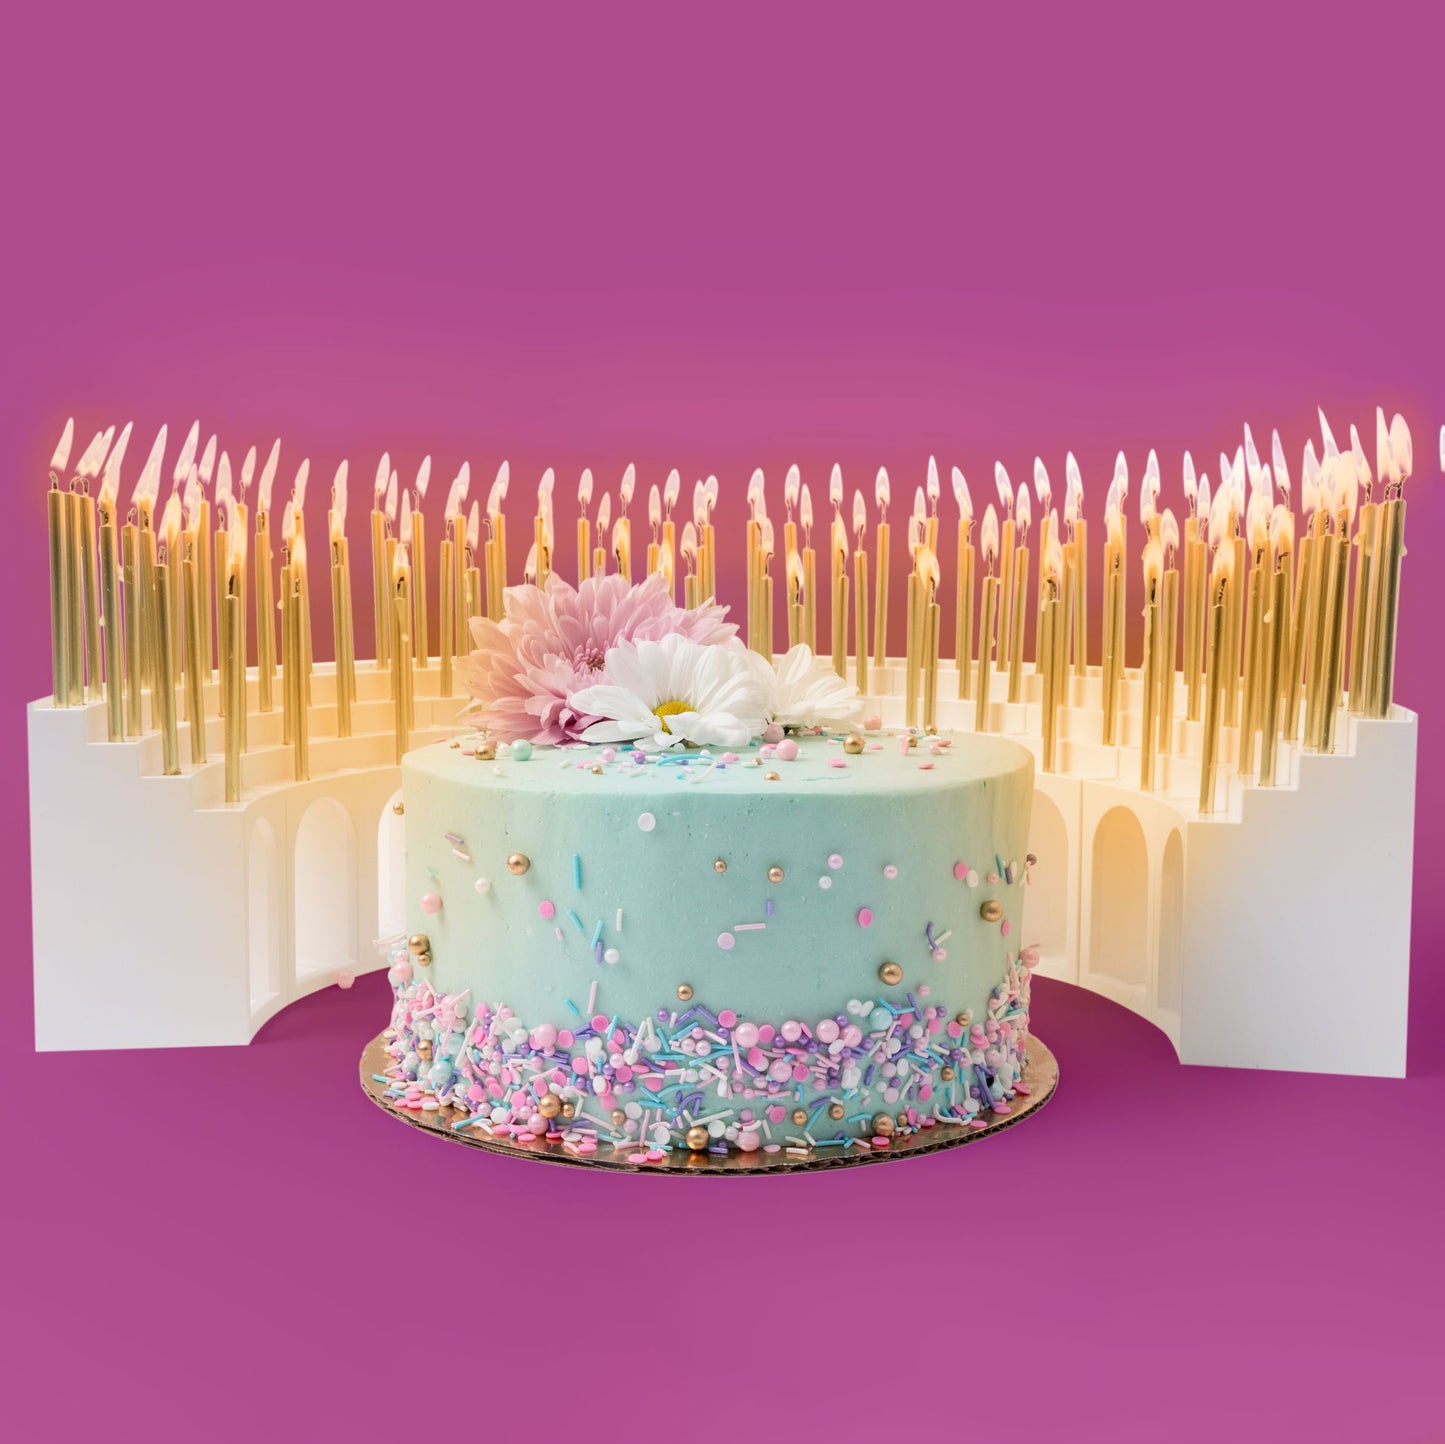 Grandstands birthday candle holder with 100 candles and festive birthday cake